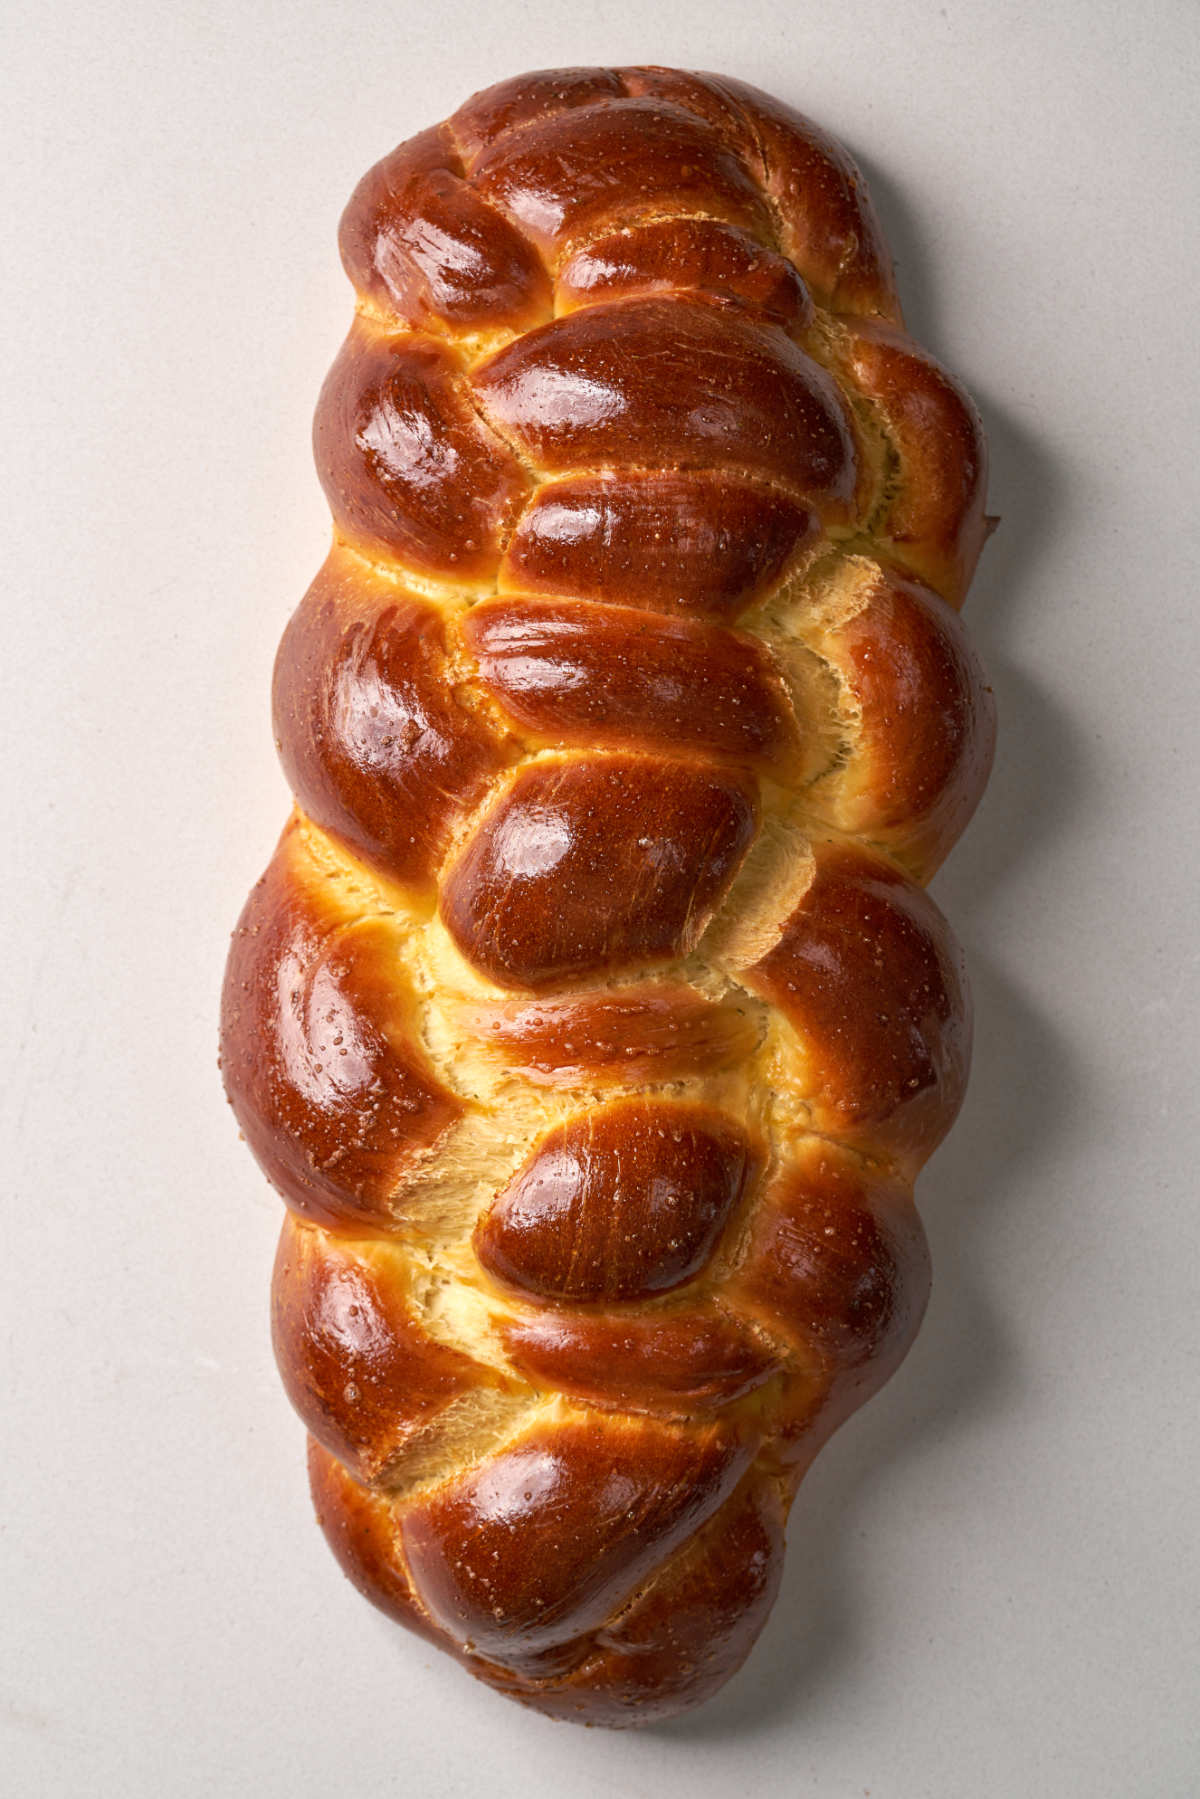 A brown, baked, braided challah bread on a white background.